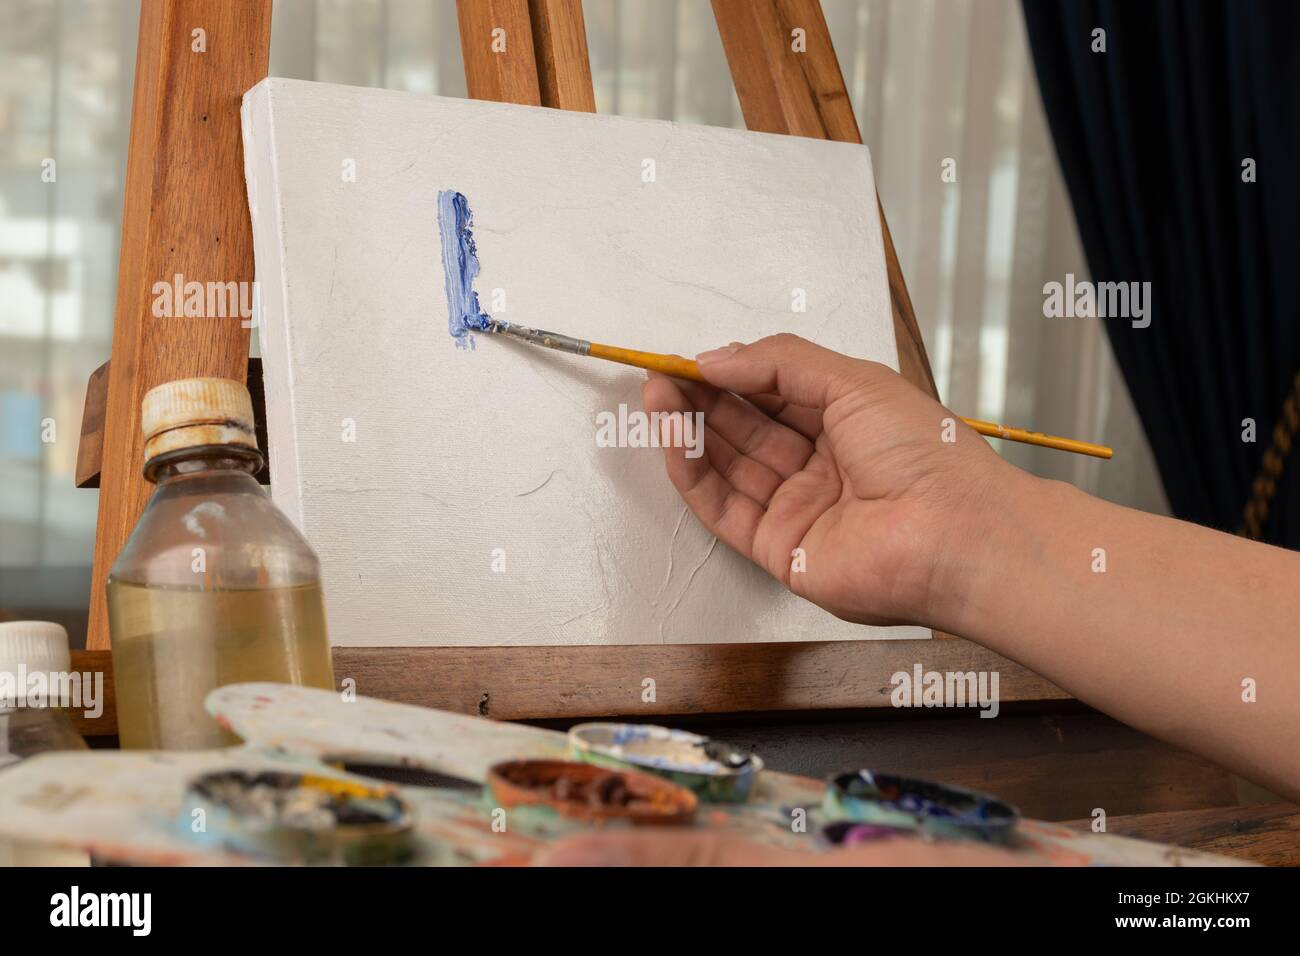 hand of a person holding a brush while painting on a wooden canvas and holding a palette, art elements in work area with natural day light, creative Stock Photo